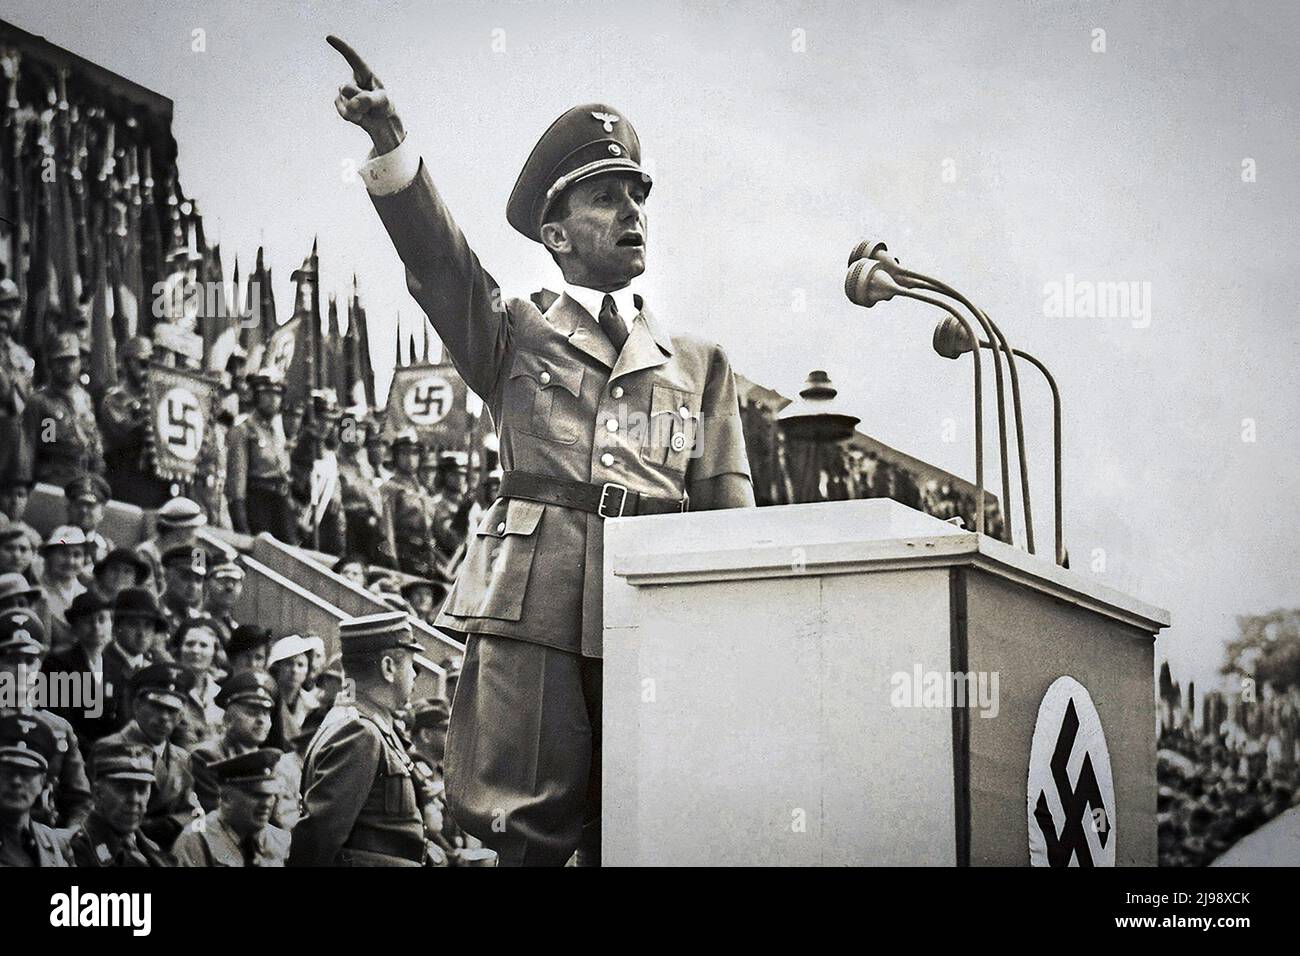 Joseph Goebbels - Reich Minister of Propaganda from 1933 to 1945 in Nazi Germany Stock Photo